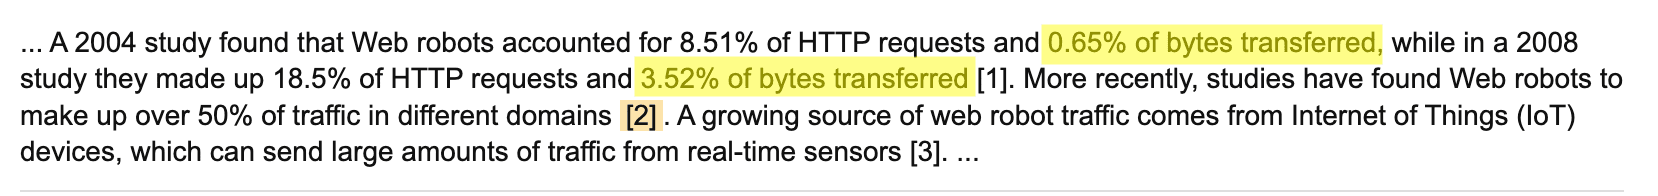 bytes transferred by robot requests on the internet - image12.png